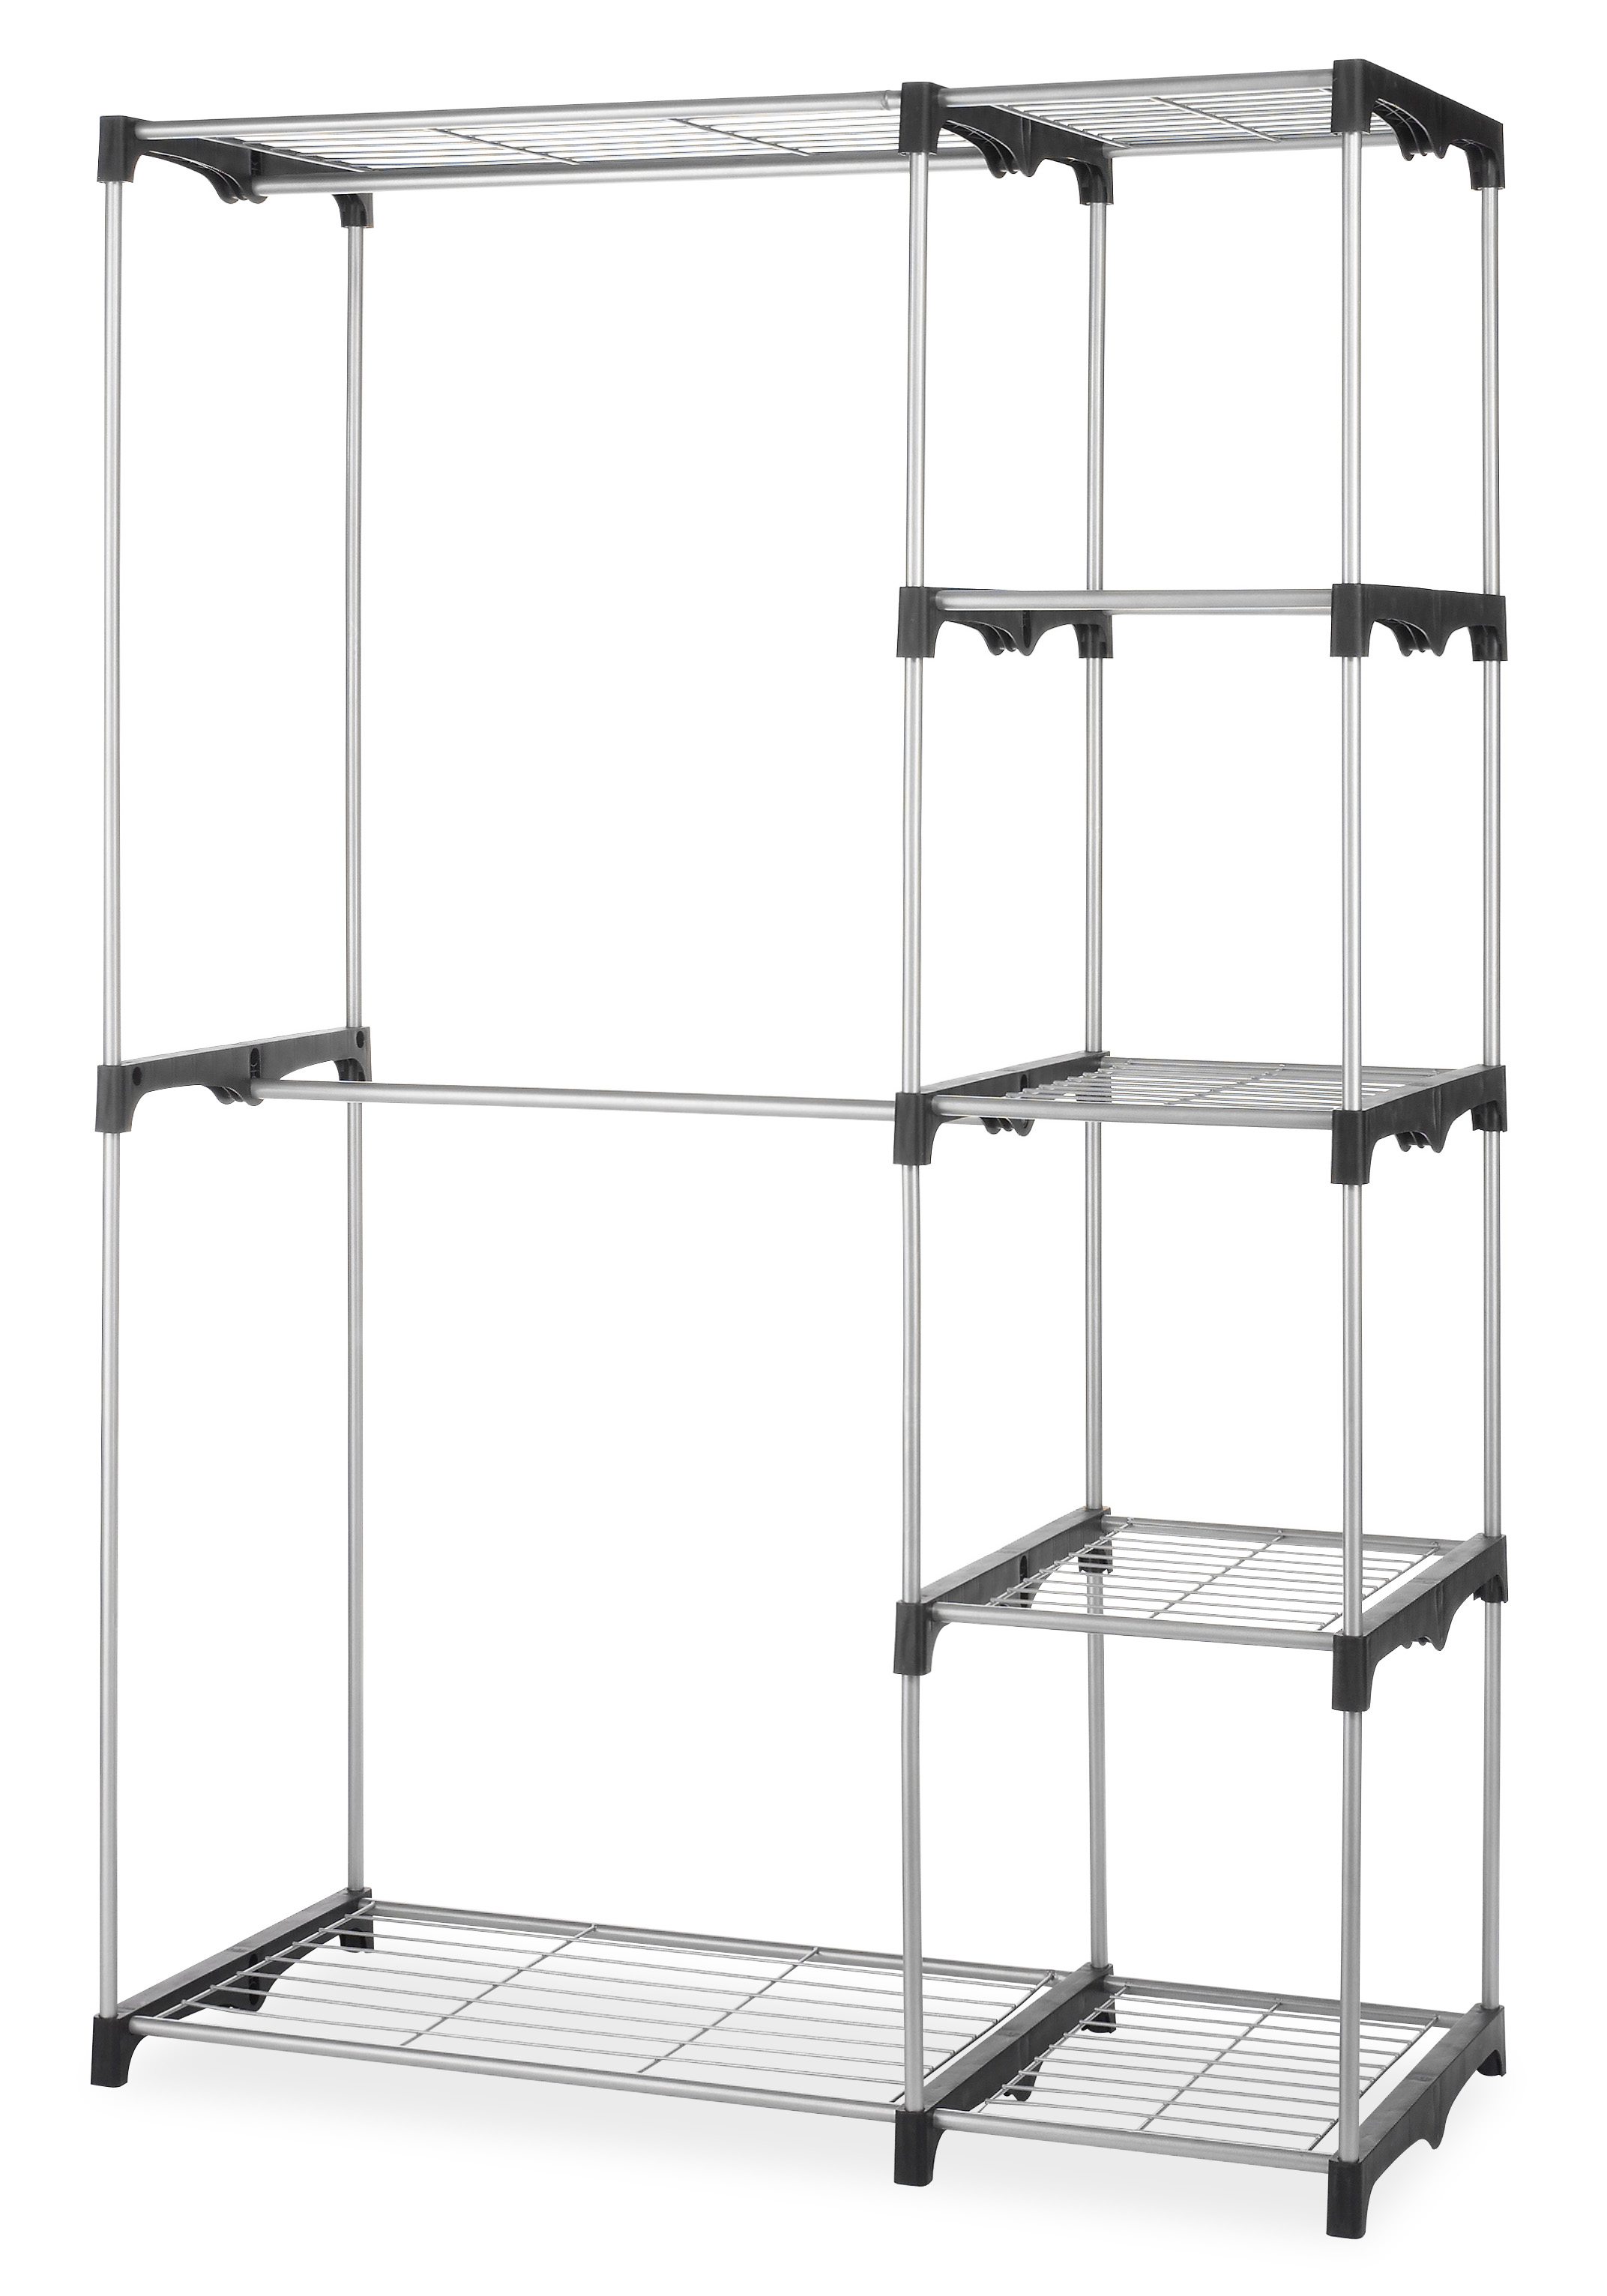 Whitmor Double Rod Closet System, Metal with Resin Connectors, Silver and Black - image 1 of 8